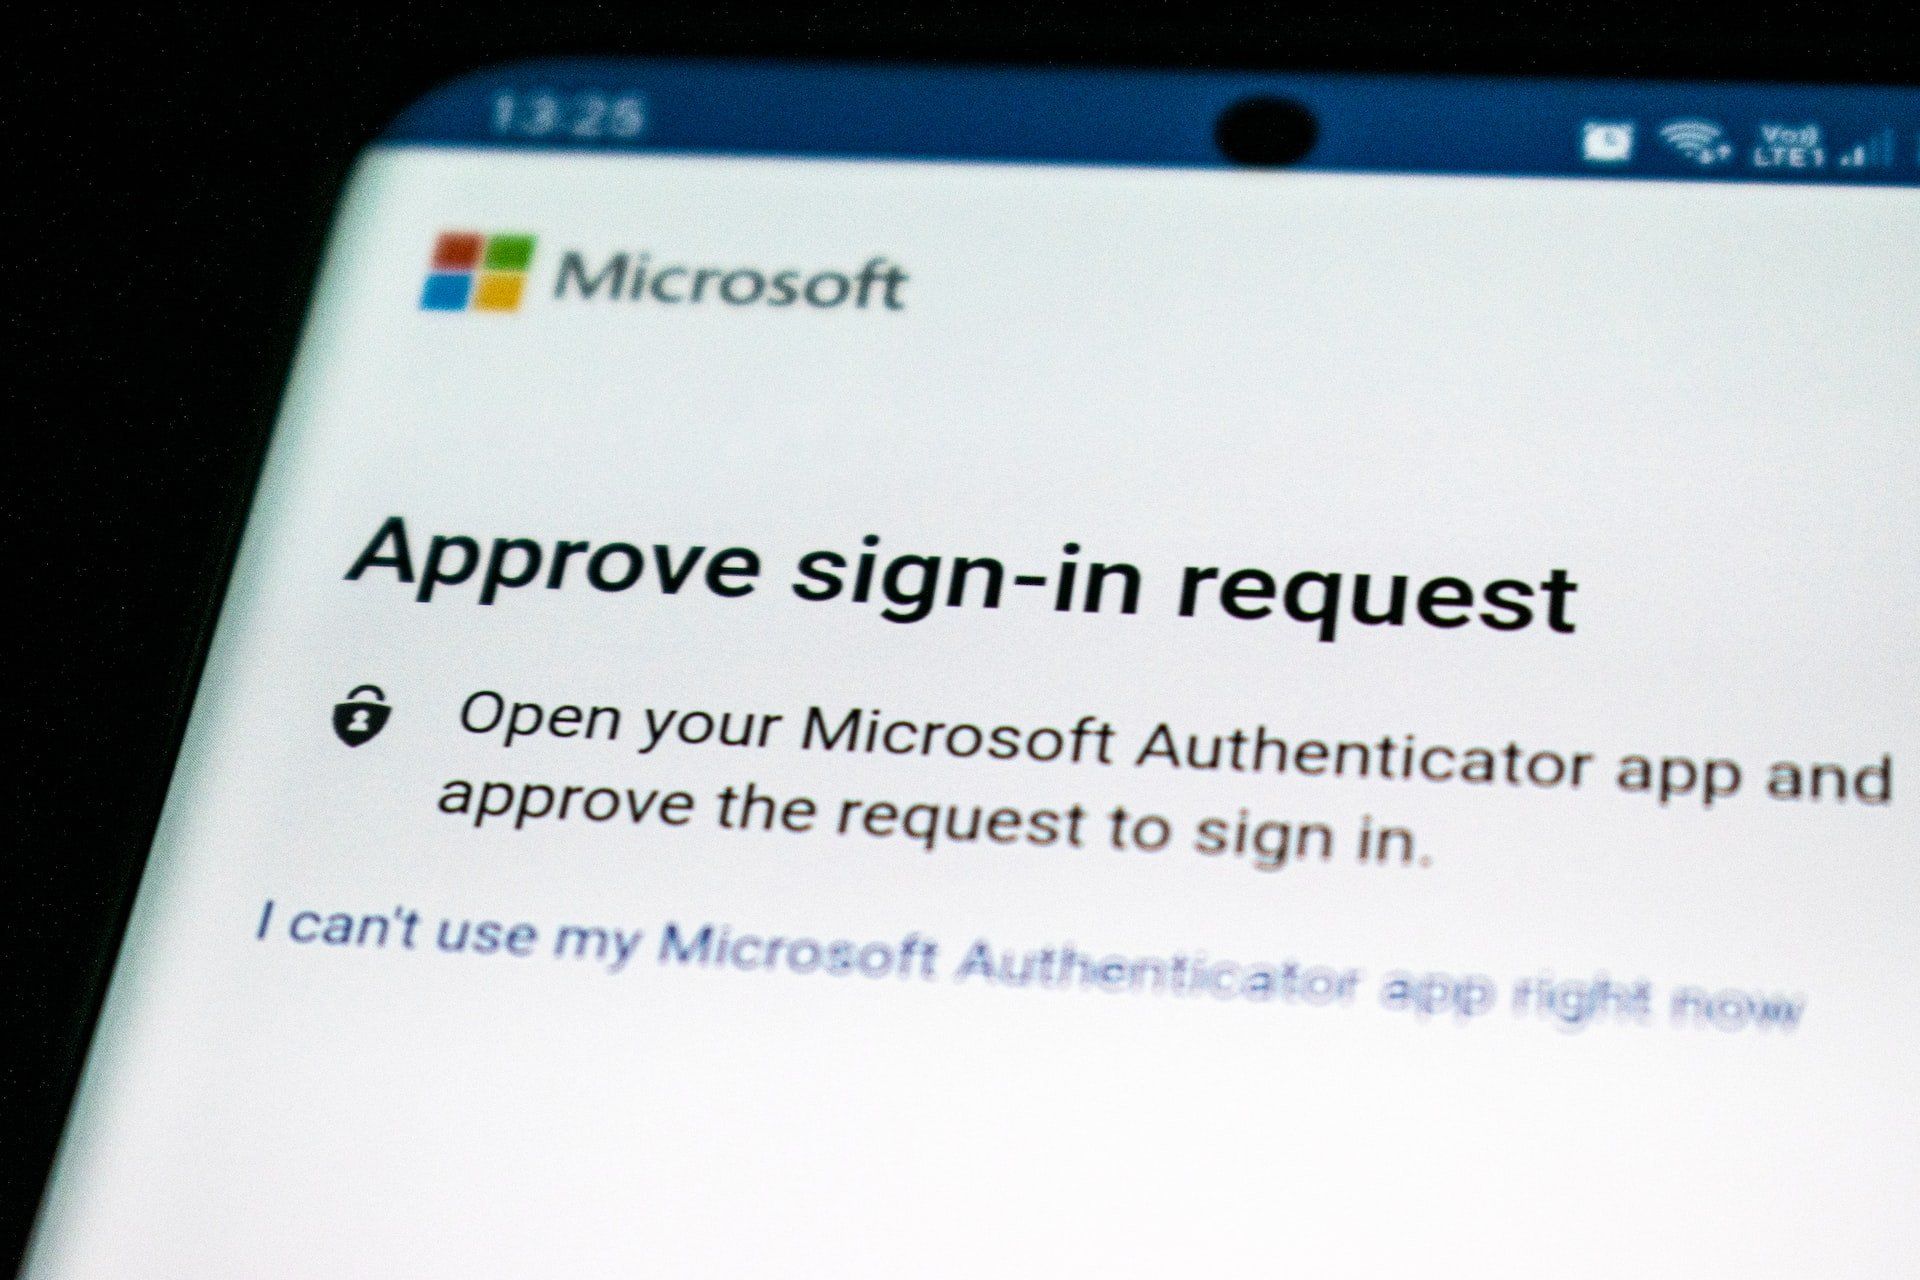 Image of an authenticator app to approve sign-in